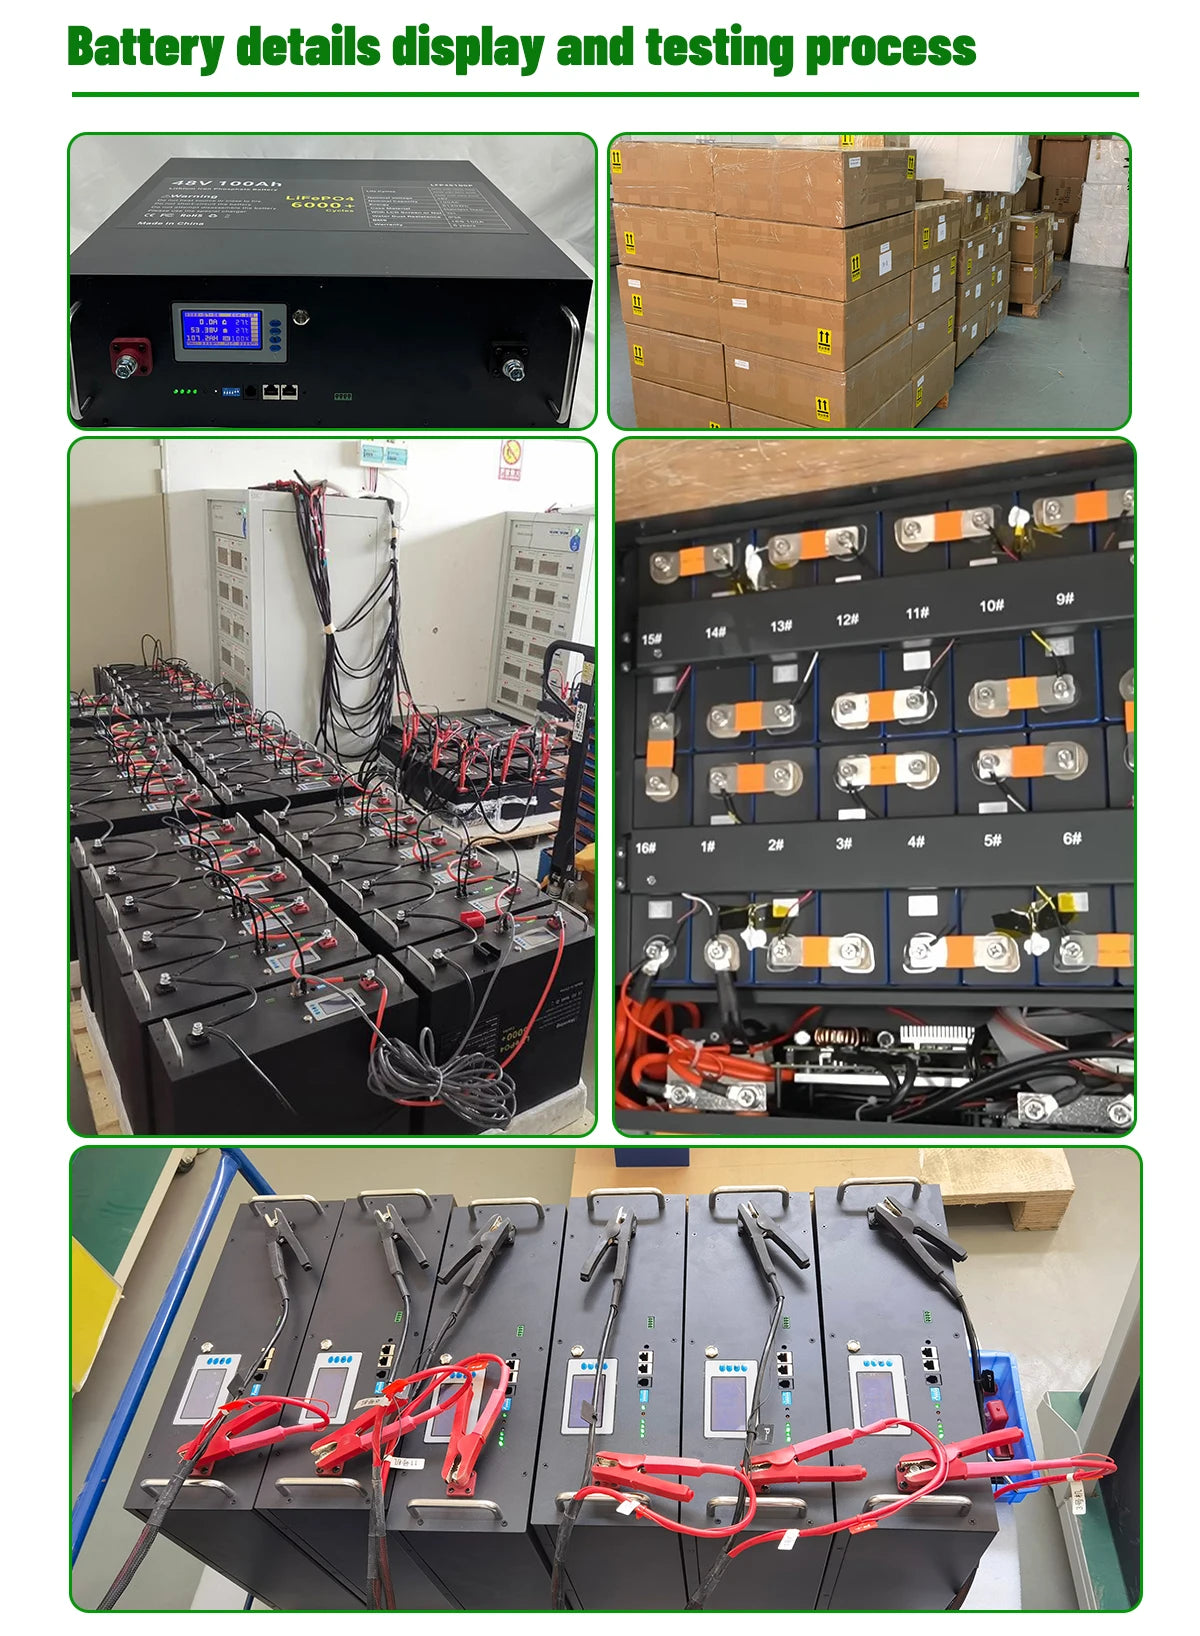 48V 100AH 200AH LiFePO4 Battery, Battery testing display showing vital stats like FM, voltage, current, and resistance.